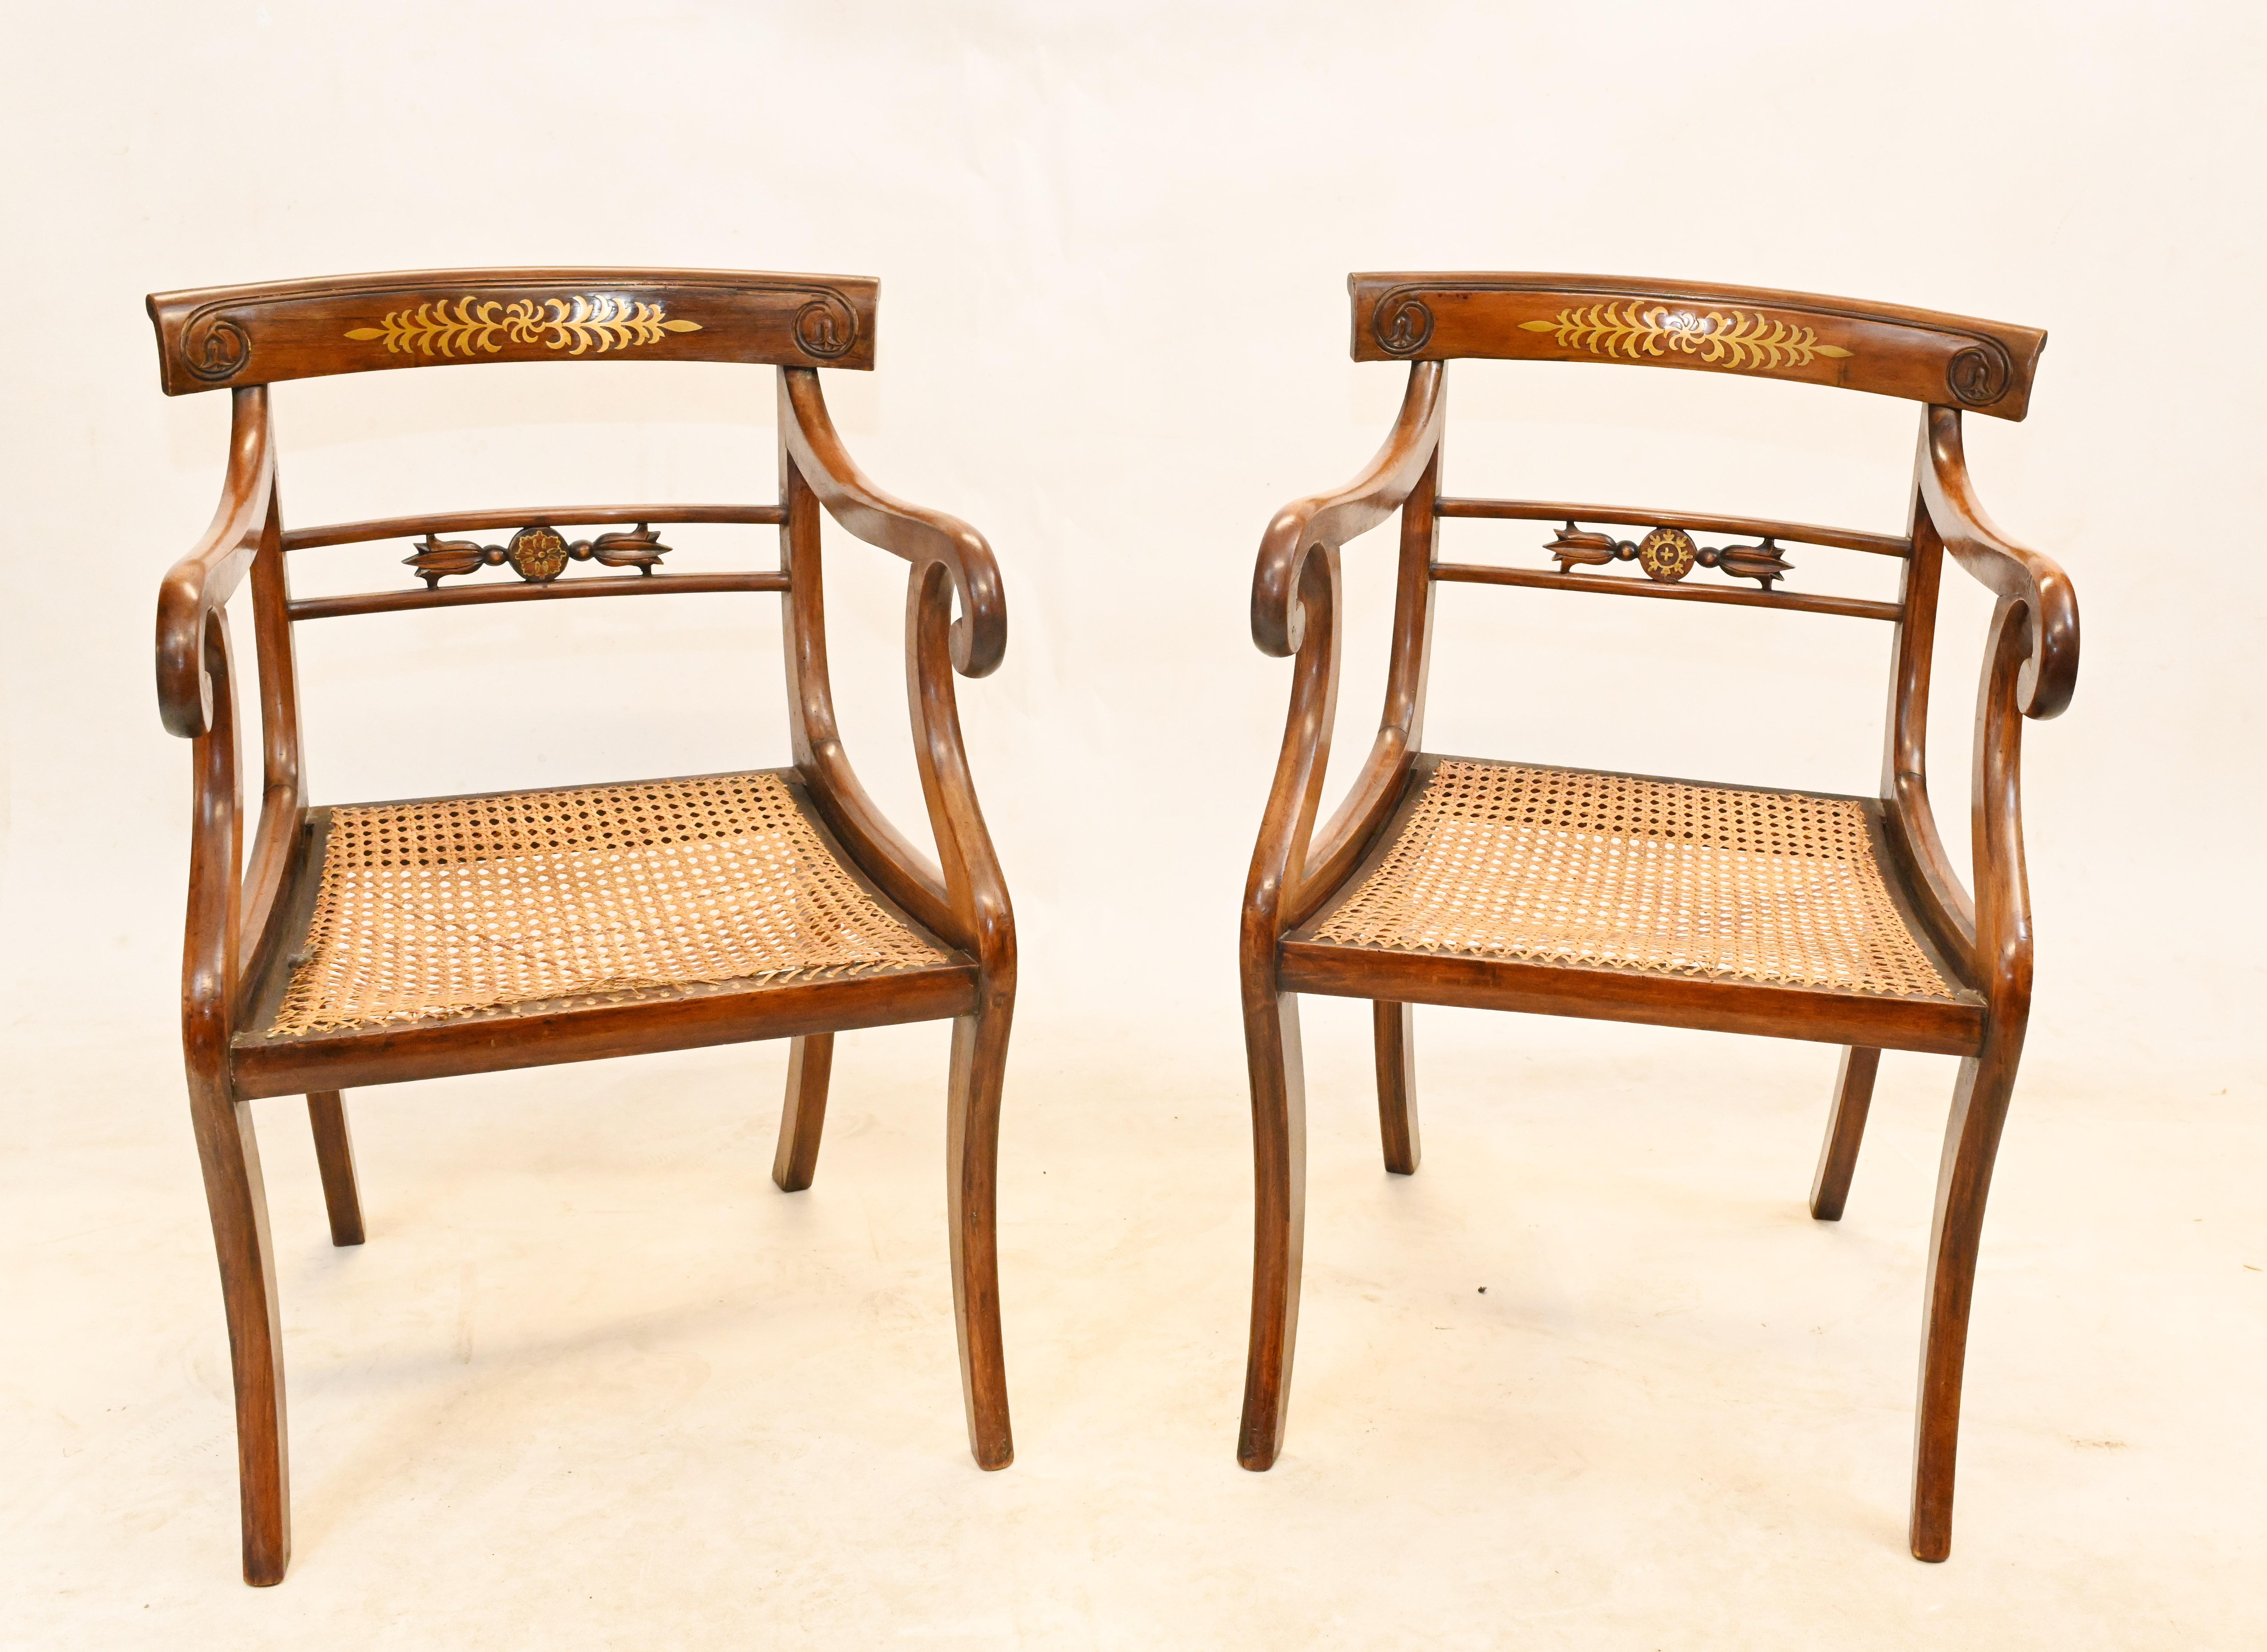 Cool pair of period Regency arm chairs in mahogany with brass inlay
Classically refined look congruent with the Regency aesthetic
Great pair of accent chairs for a contemporary interior
Viewing by appointment
Offered in great shape ready for